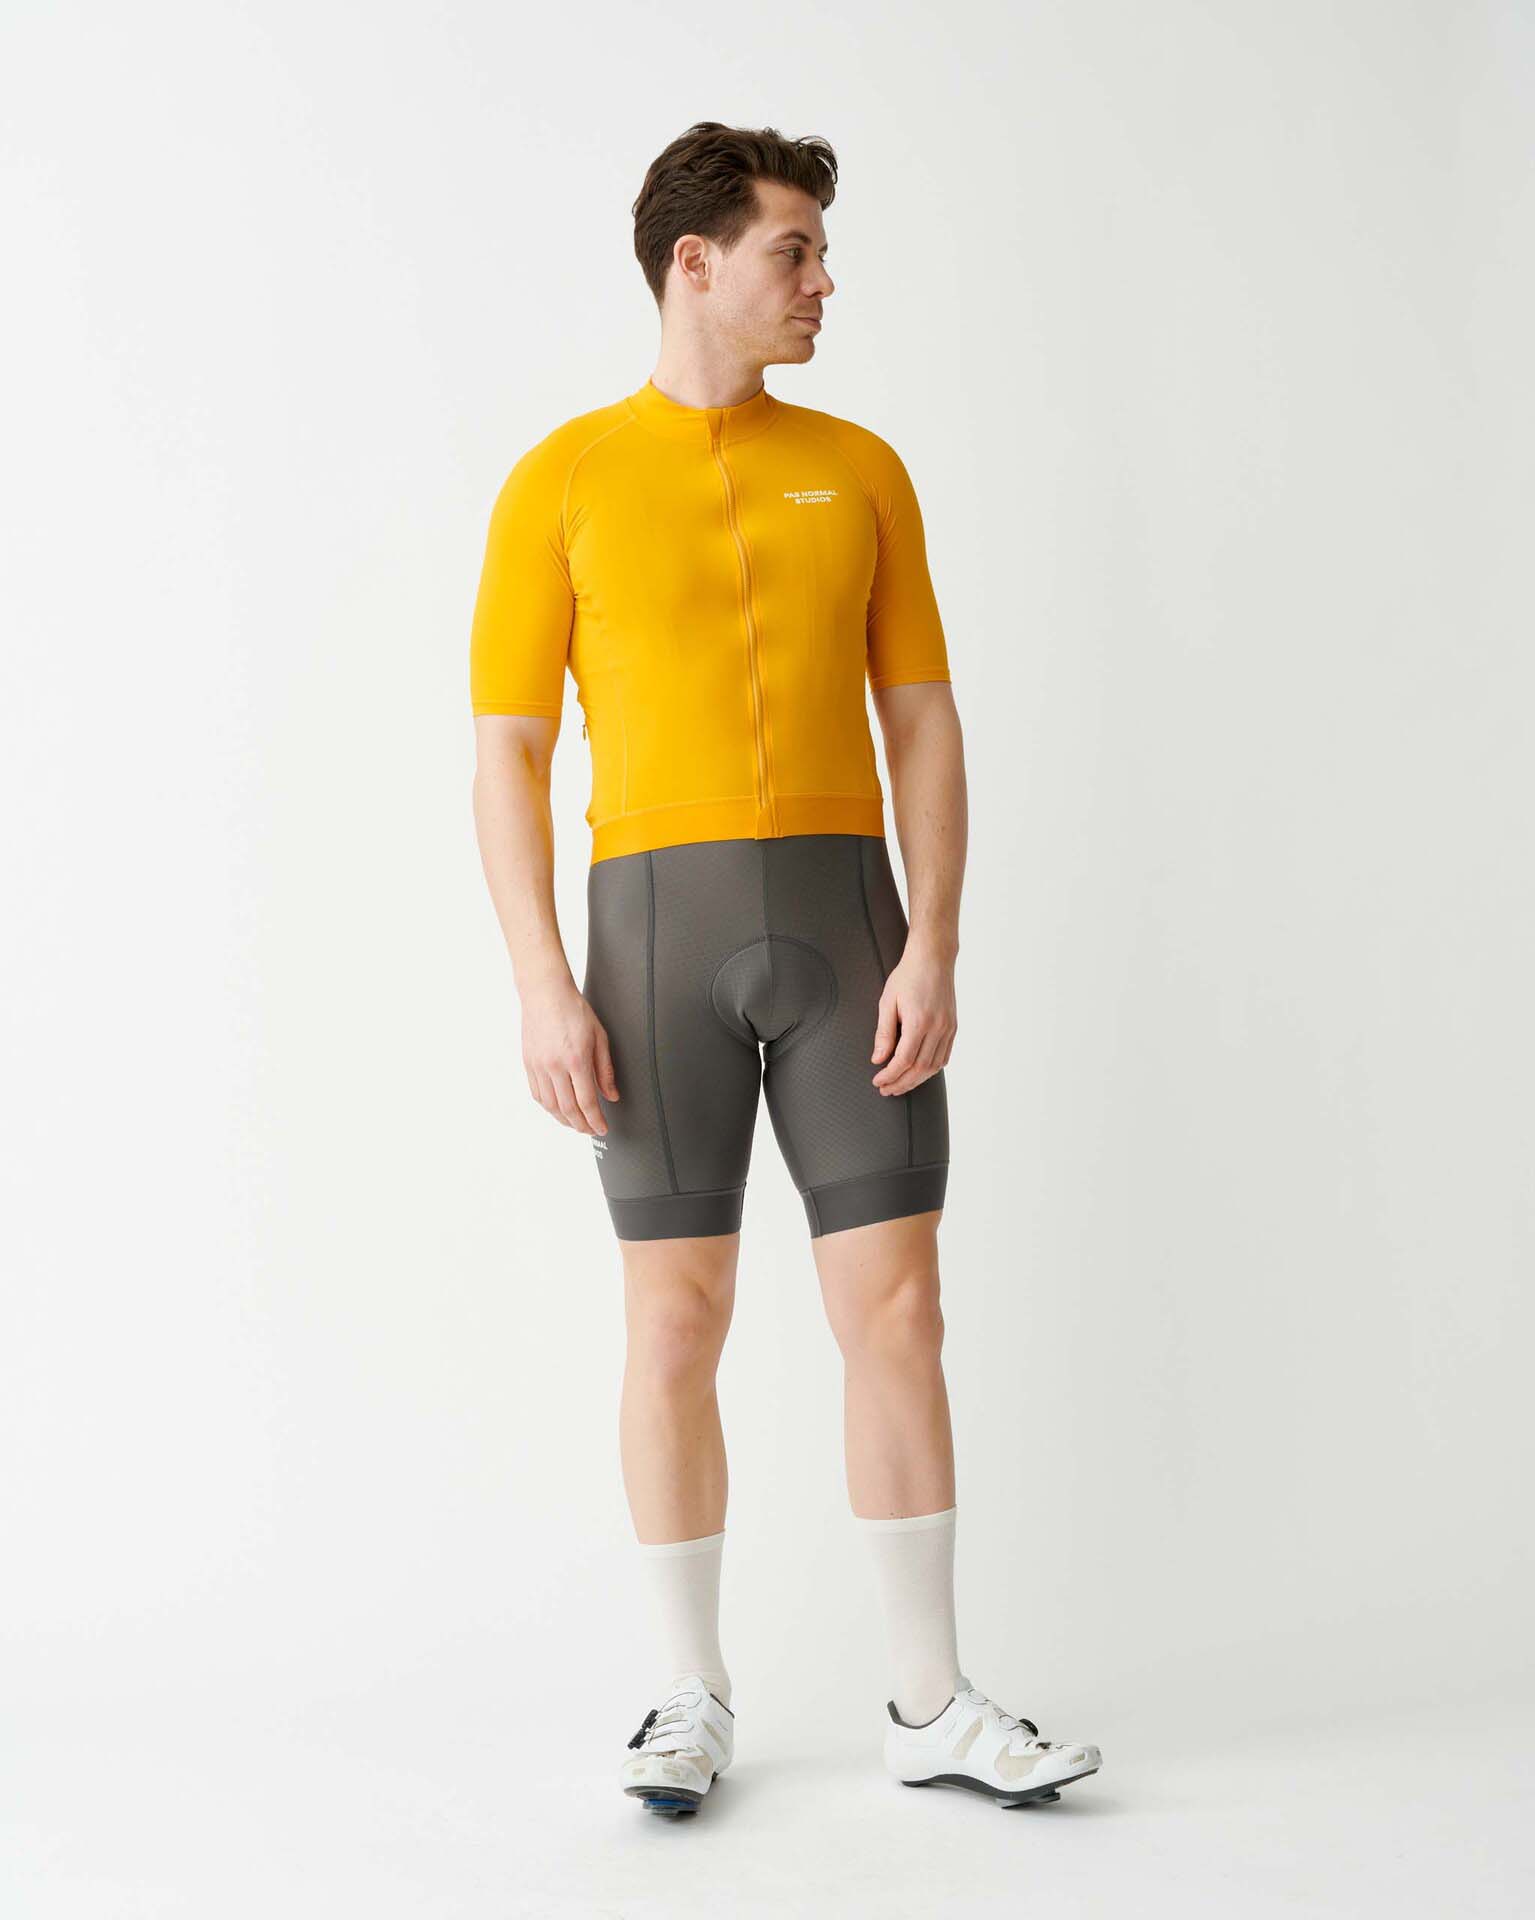 PAS NORMAL STUDIOS Essential Jersey - Bright Yellow front model